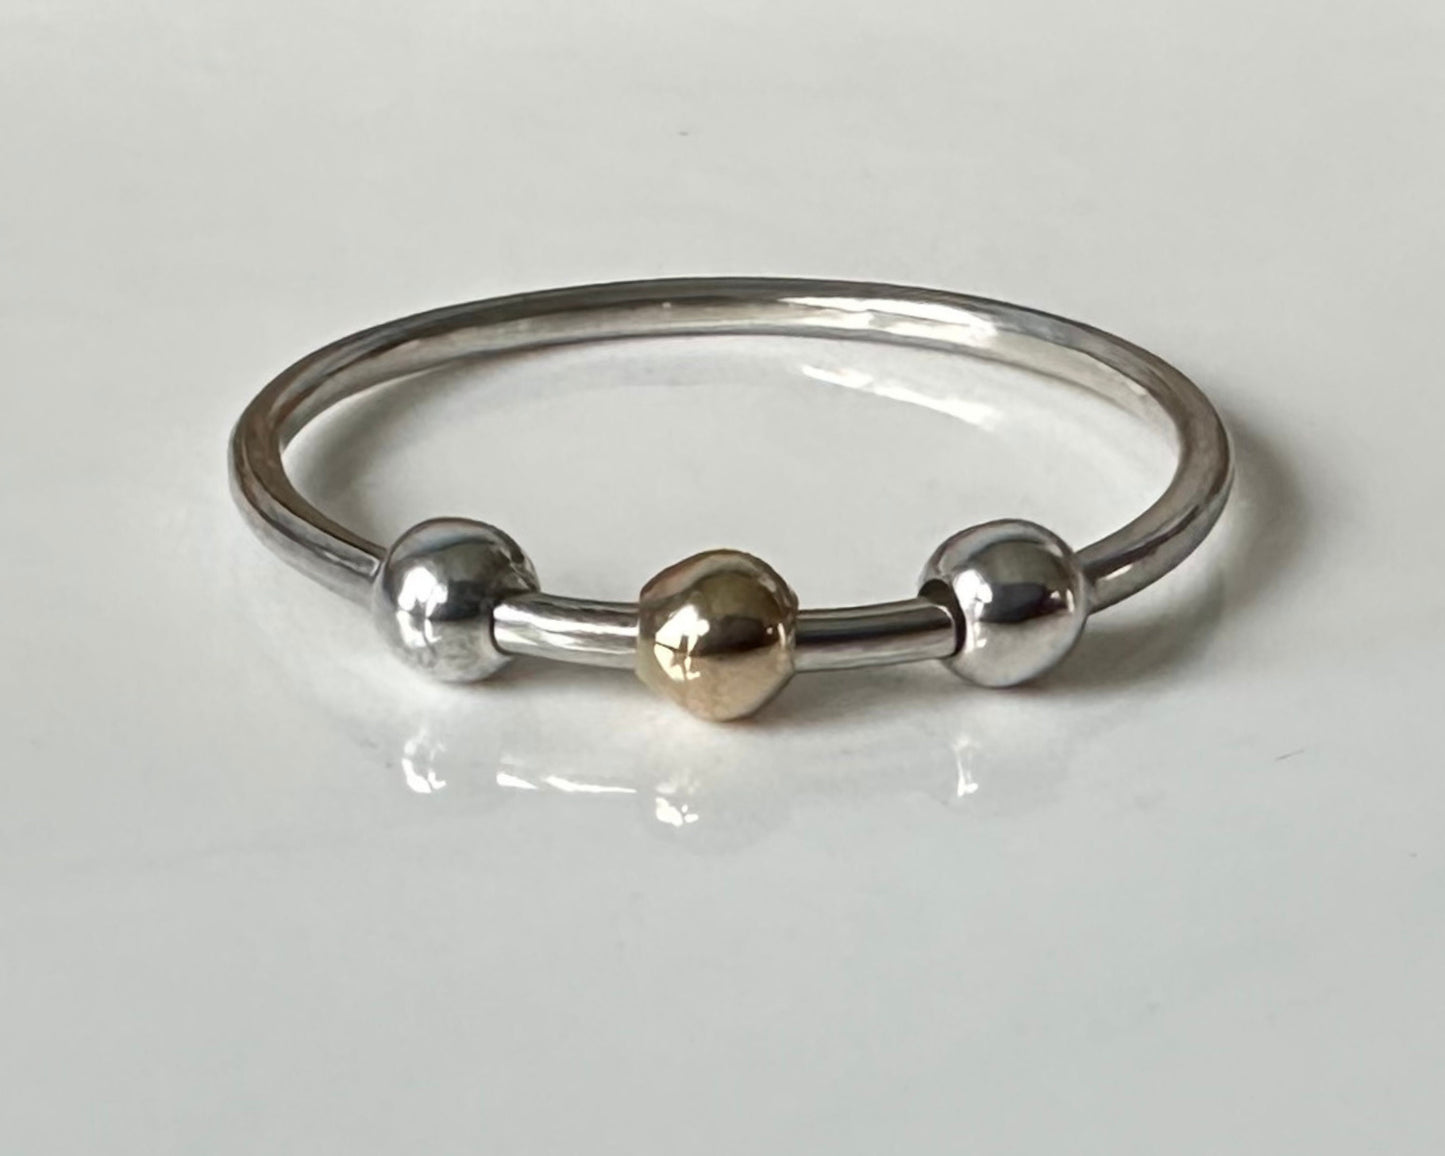 Fidget Ring Handmade from 925 Sterling Silver and 9ct Gold and Silver Beads, Gold and Silver Stackable Ring Band, Anxiety Ring, Spinner Ring